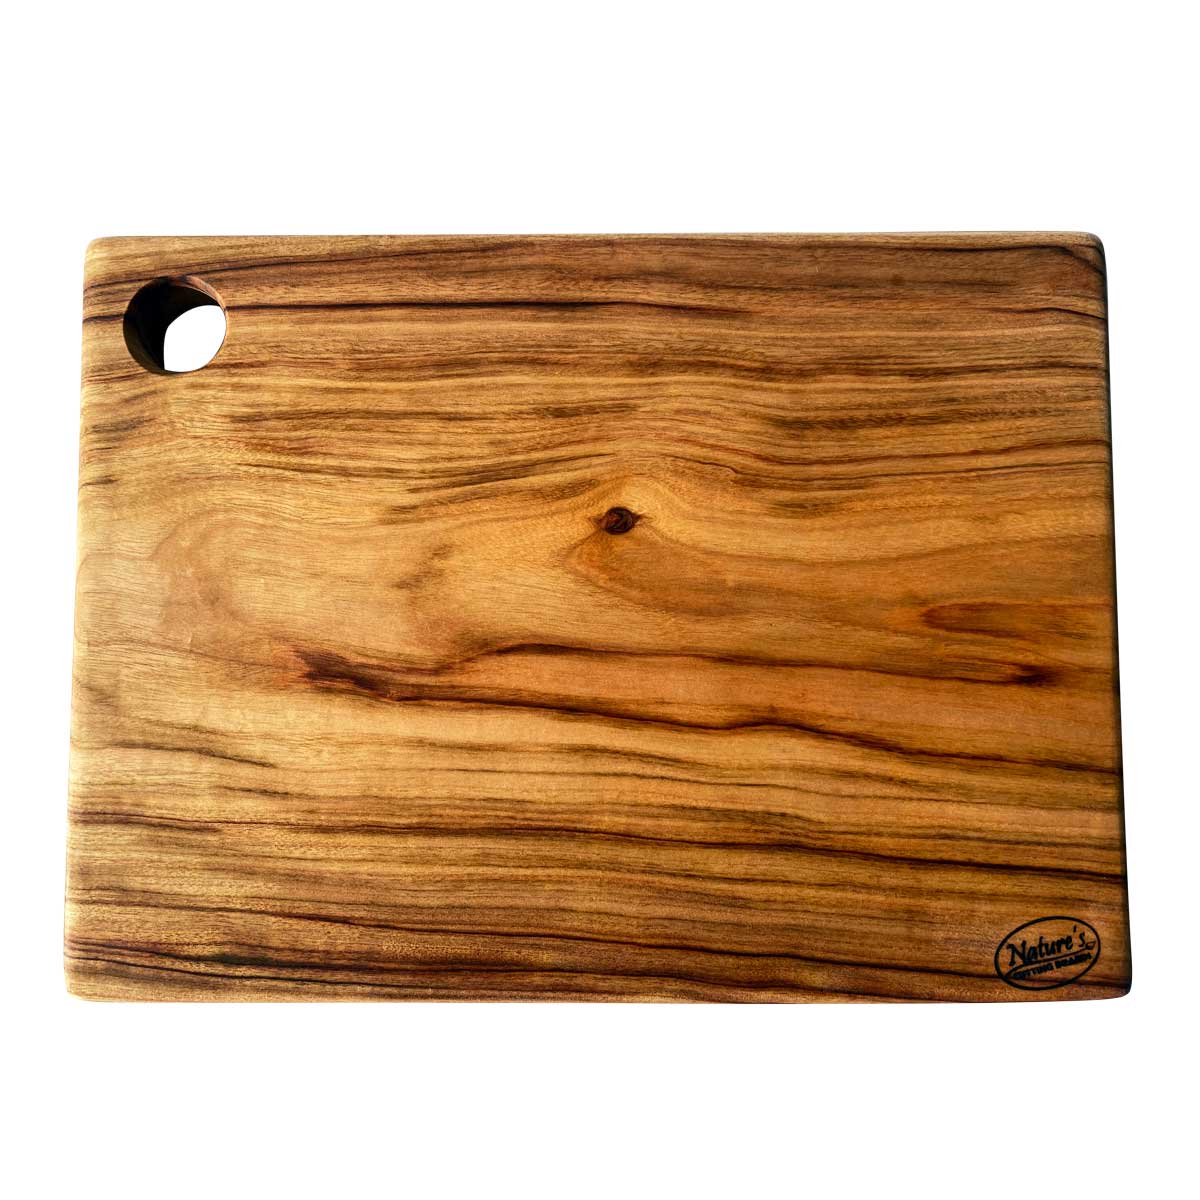 A stunning rectangular wood cutting and chopping board from Nature's Boards, designed with a round hole in one corner and a variety of colours and tones in the camphor laurel.